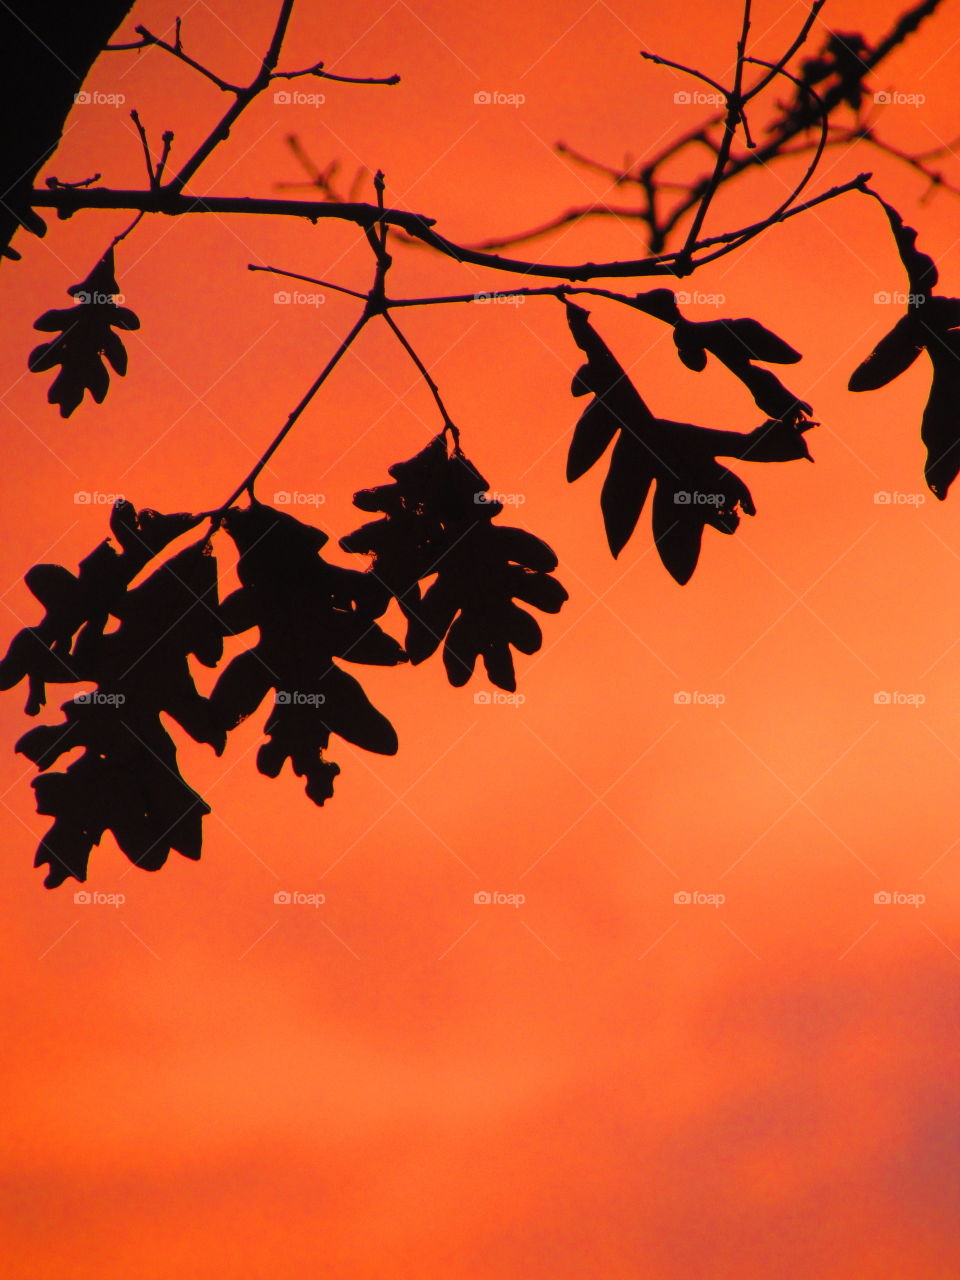 Silhouette of tree branches and dramatic orange dky